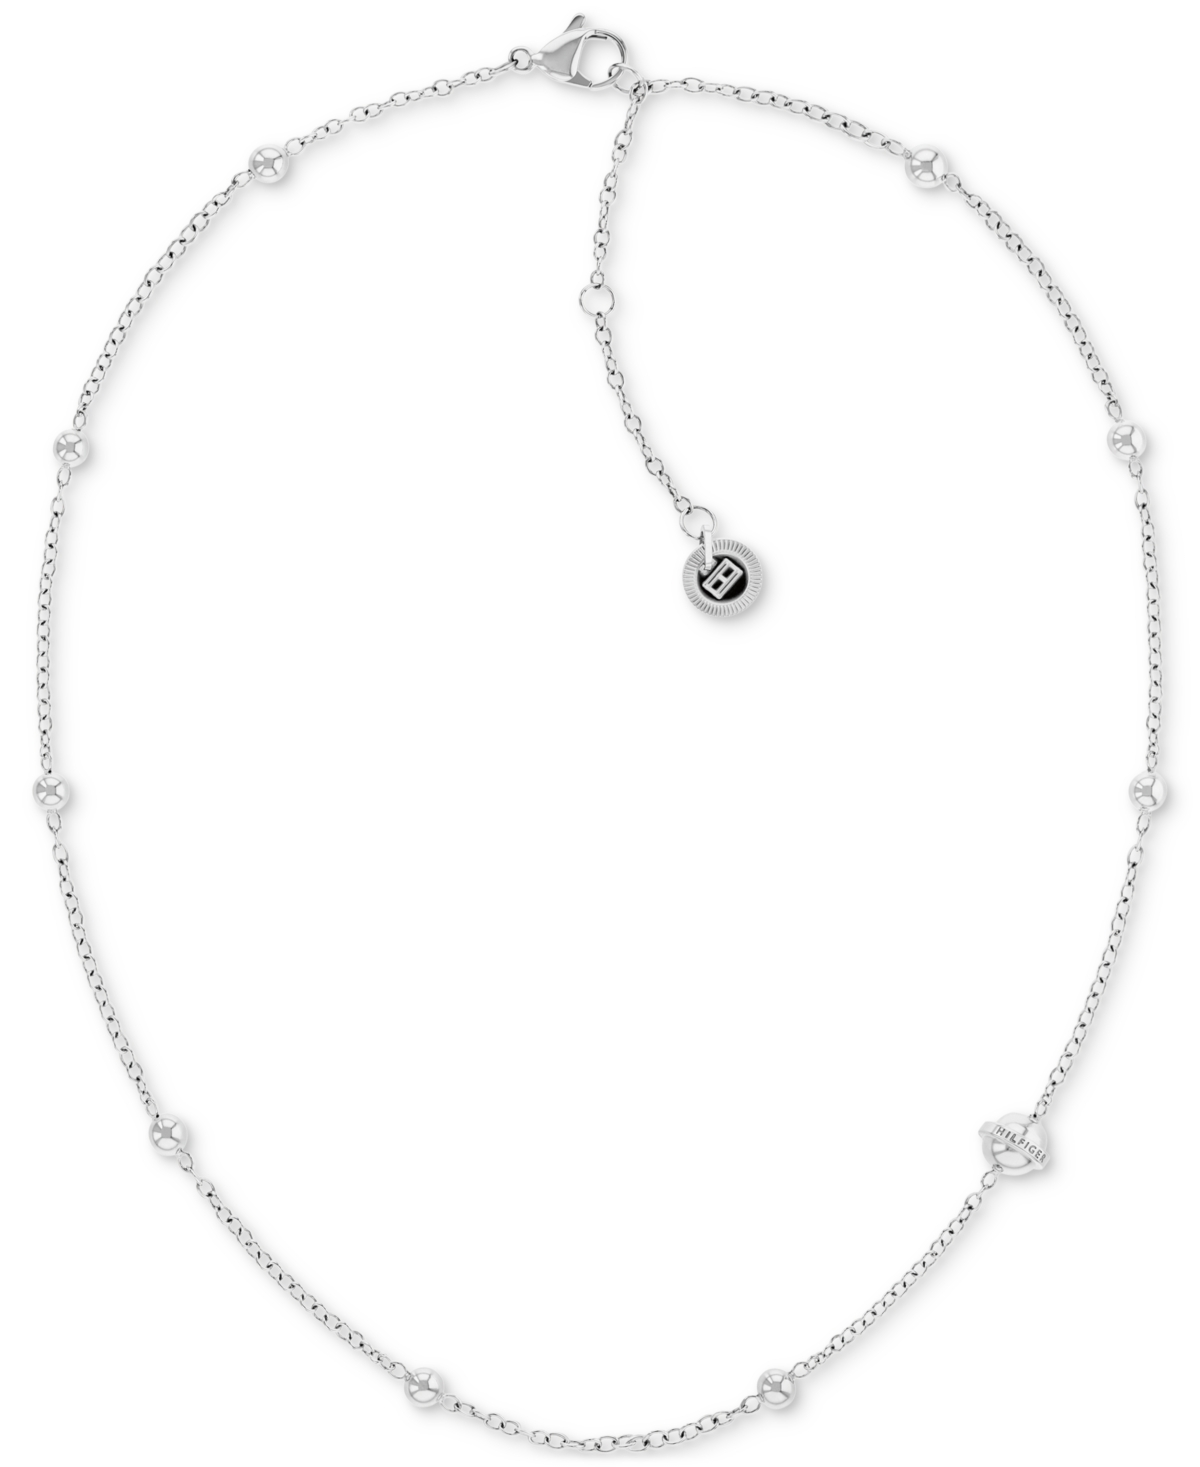 Tommy Hilfiger Stainless Steel Metallic Orb Station Necklace, 16" + 2" Extender In Silver